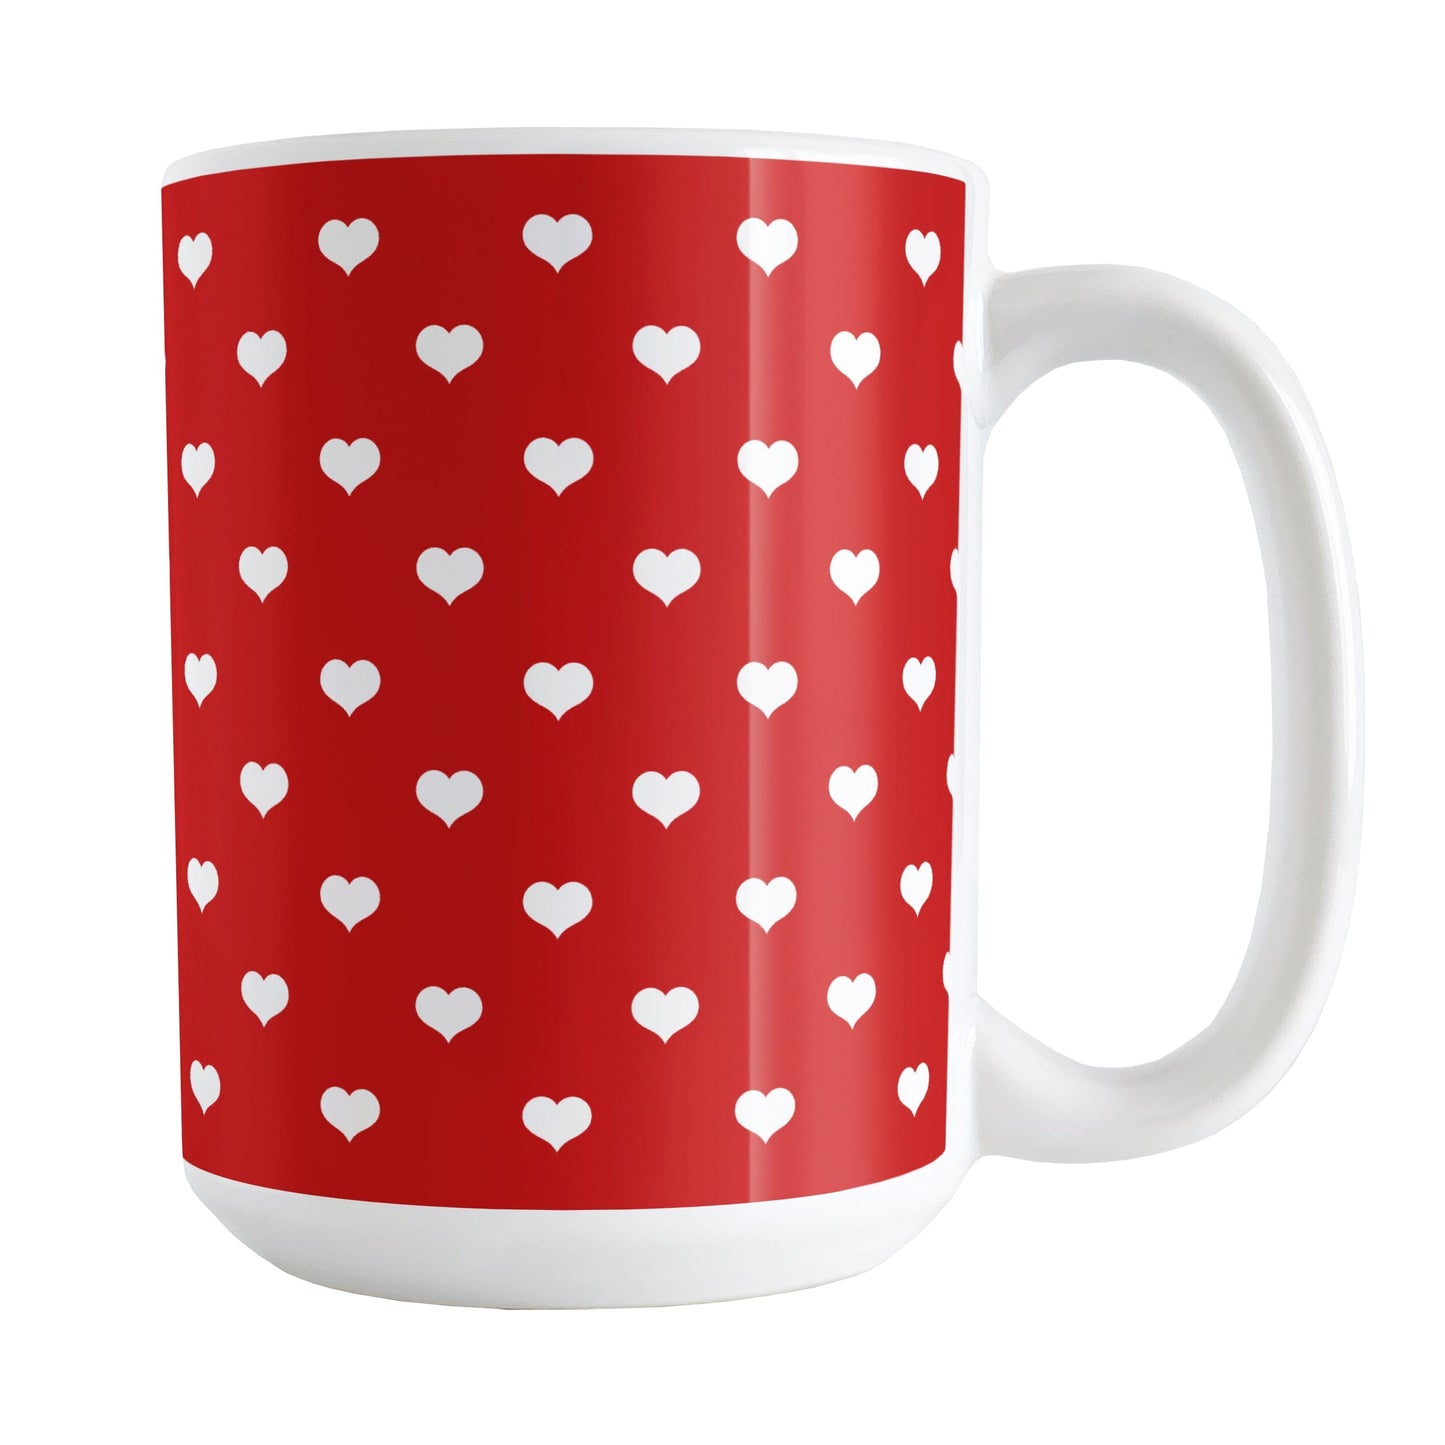 Small White Hearts Pattern Red Mug (15oz) at Amy's Coffee Mugs. A ceramic coffee mug designed with a pattern of small white hearts over a red background color that wraps around the mug to the handle. It's the perfect mug for anyone who loves hearts and the color red.